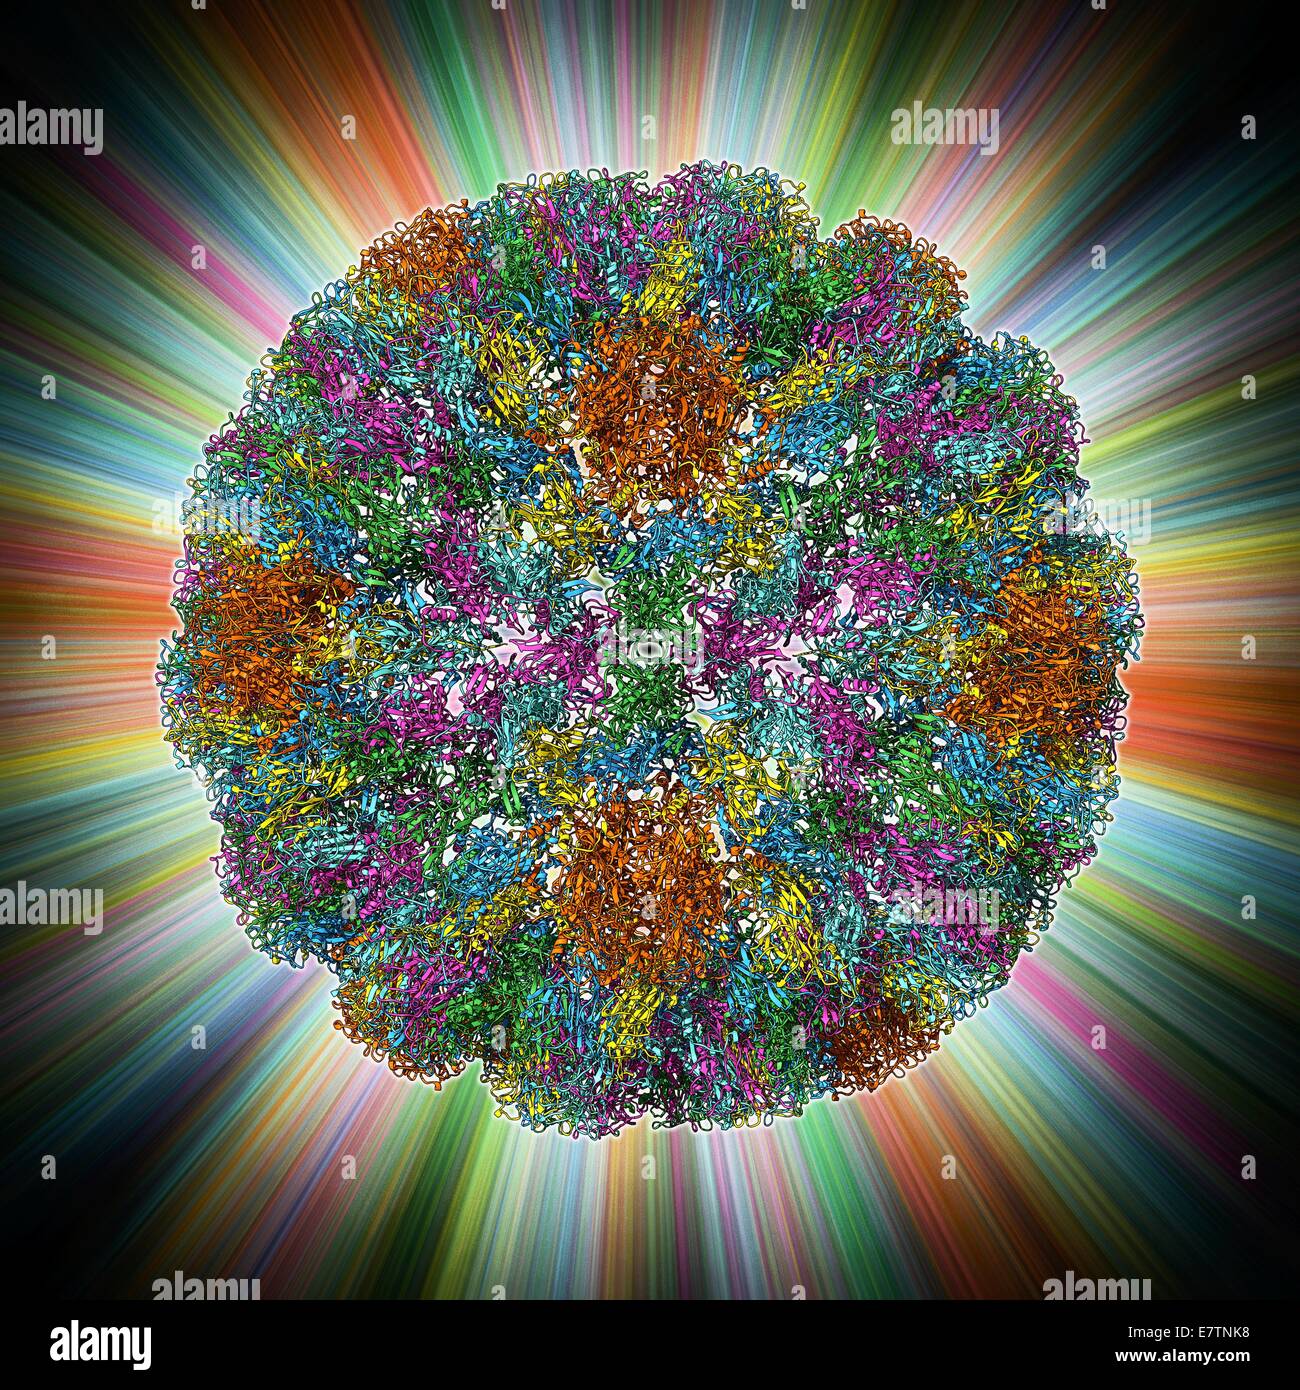 SV40 virus capsid, molecular model. Simian virus 40 (SV40) is found in monkeys such as Rhesus monkeys and macaques. Potentially tumour-causing, it is used in laboratory research and in vaccines. In viruses, the capsid is the protein shell that encloses th Stock Photo